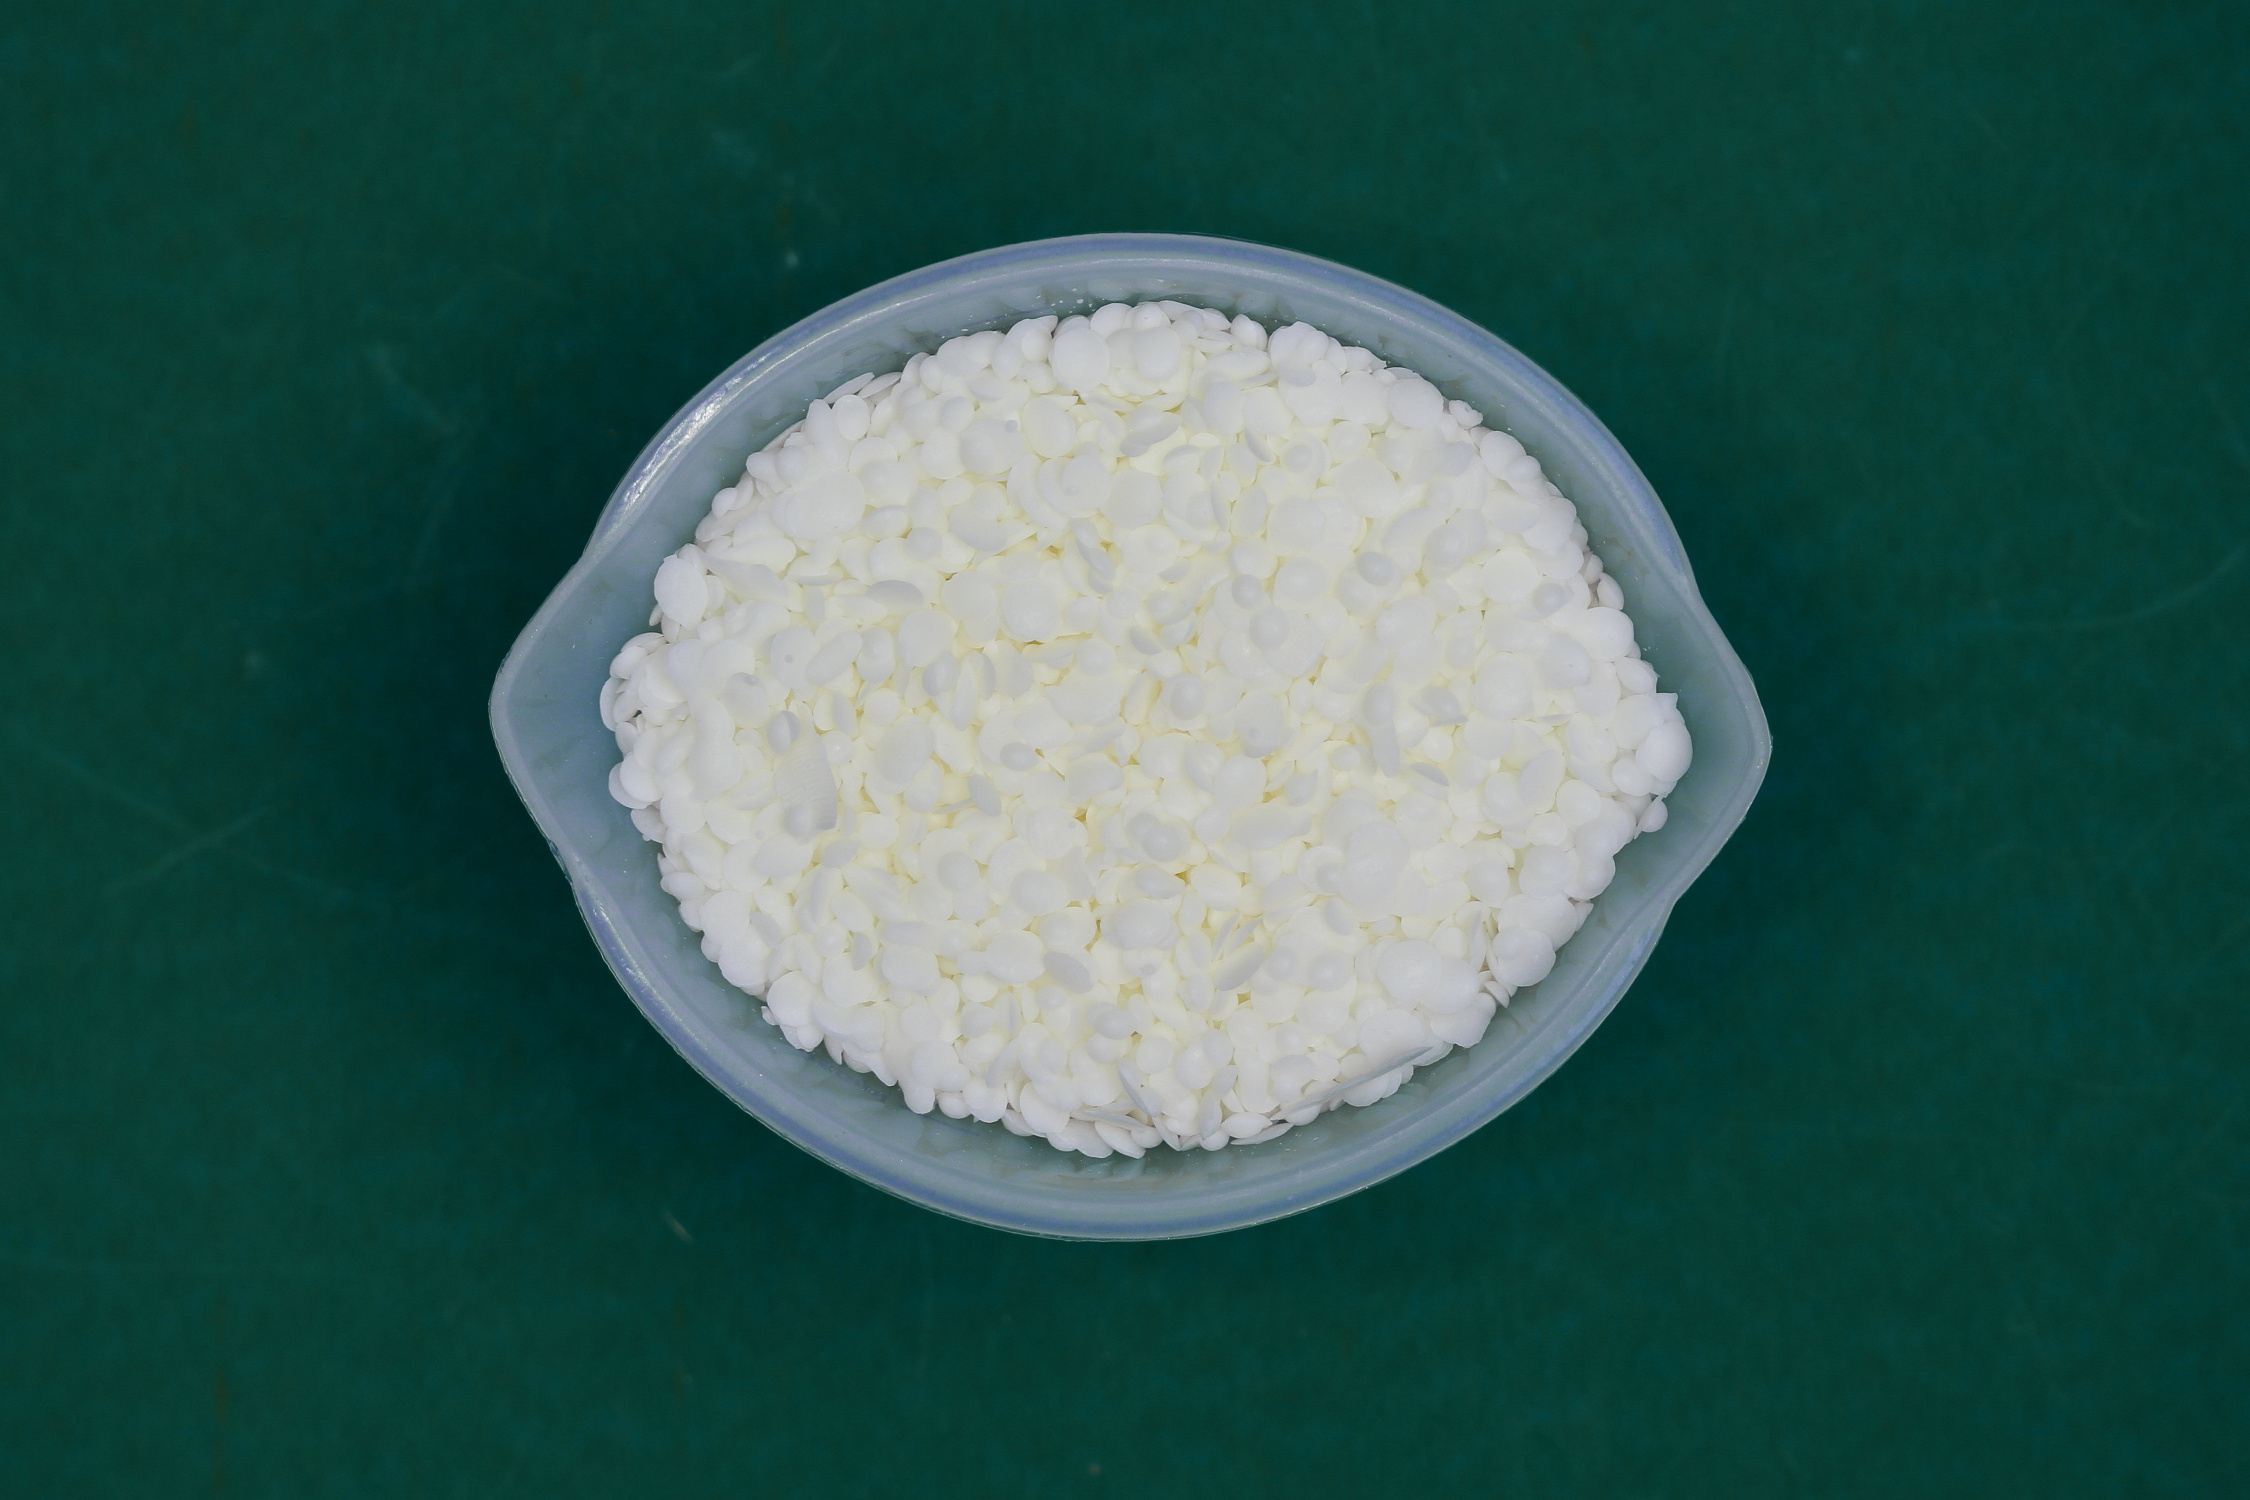 soy wax pellets in a silicone measuring cup